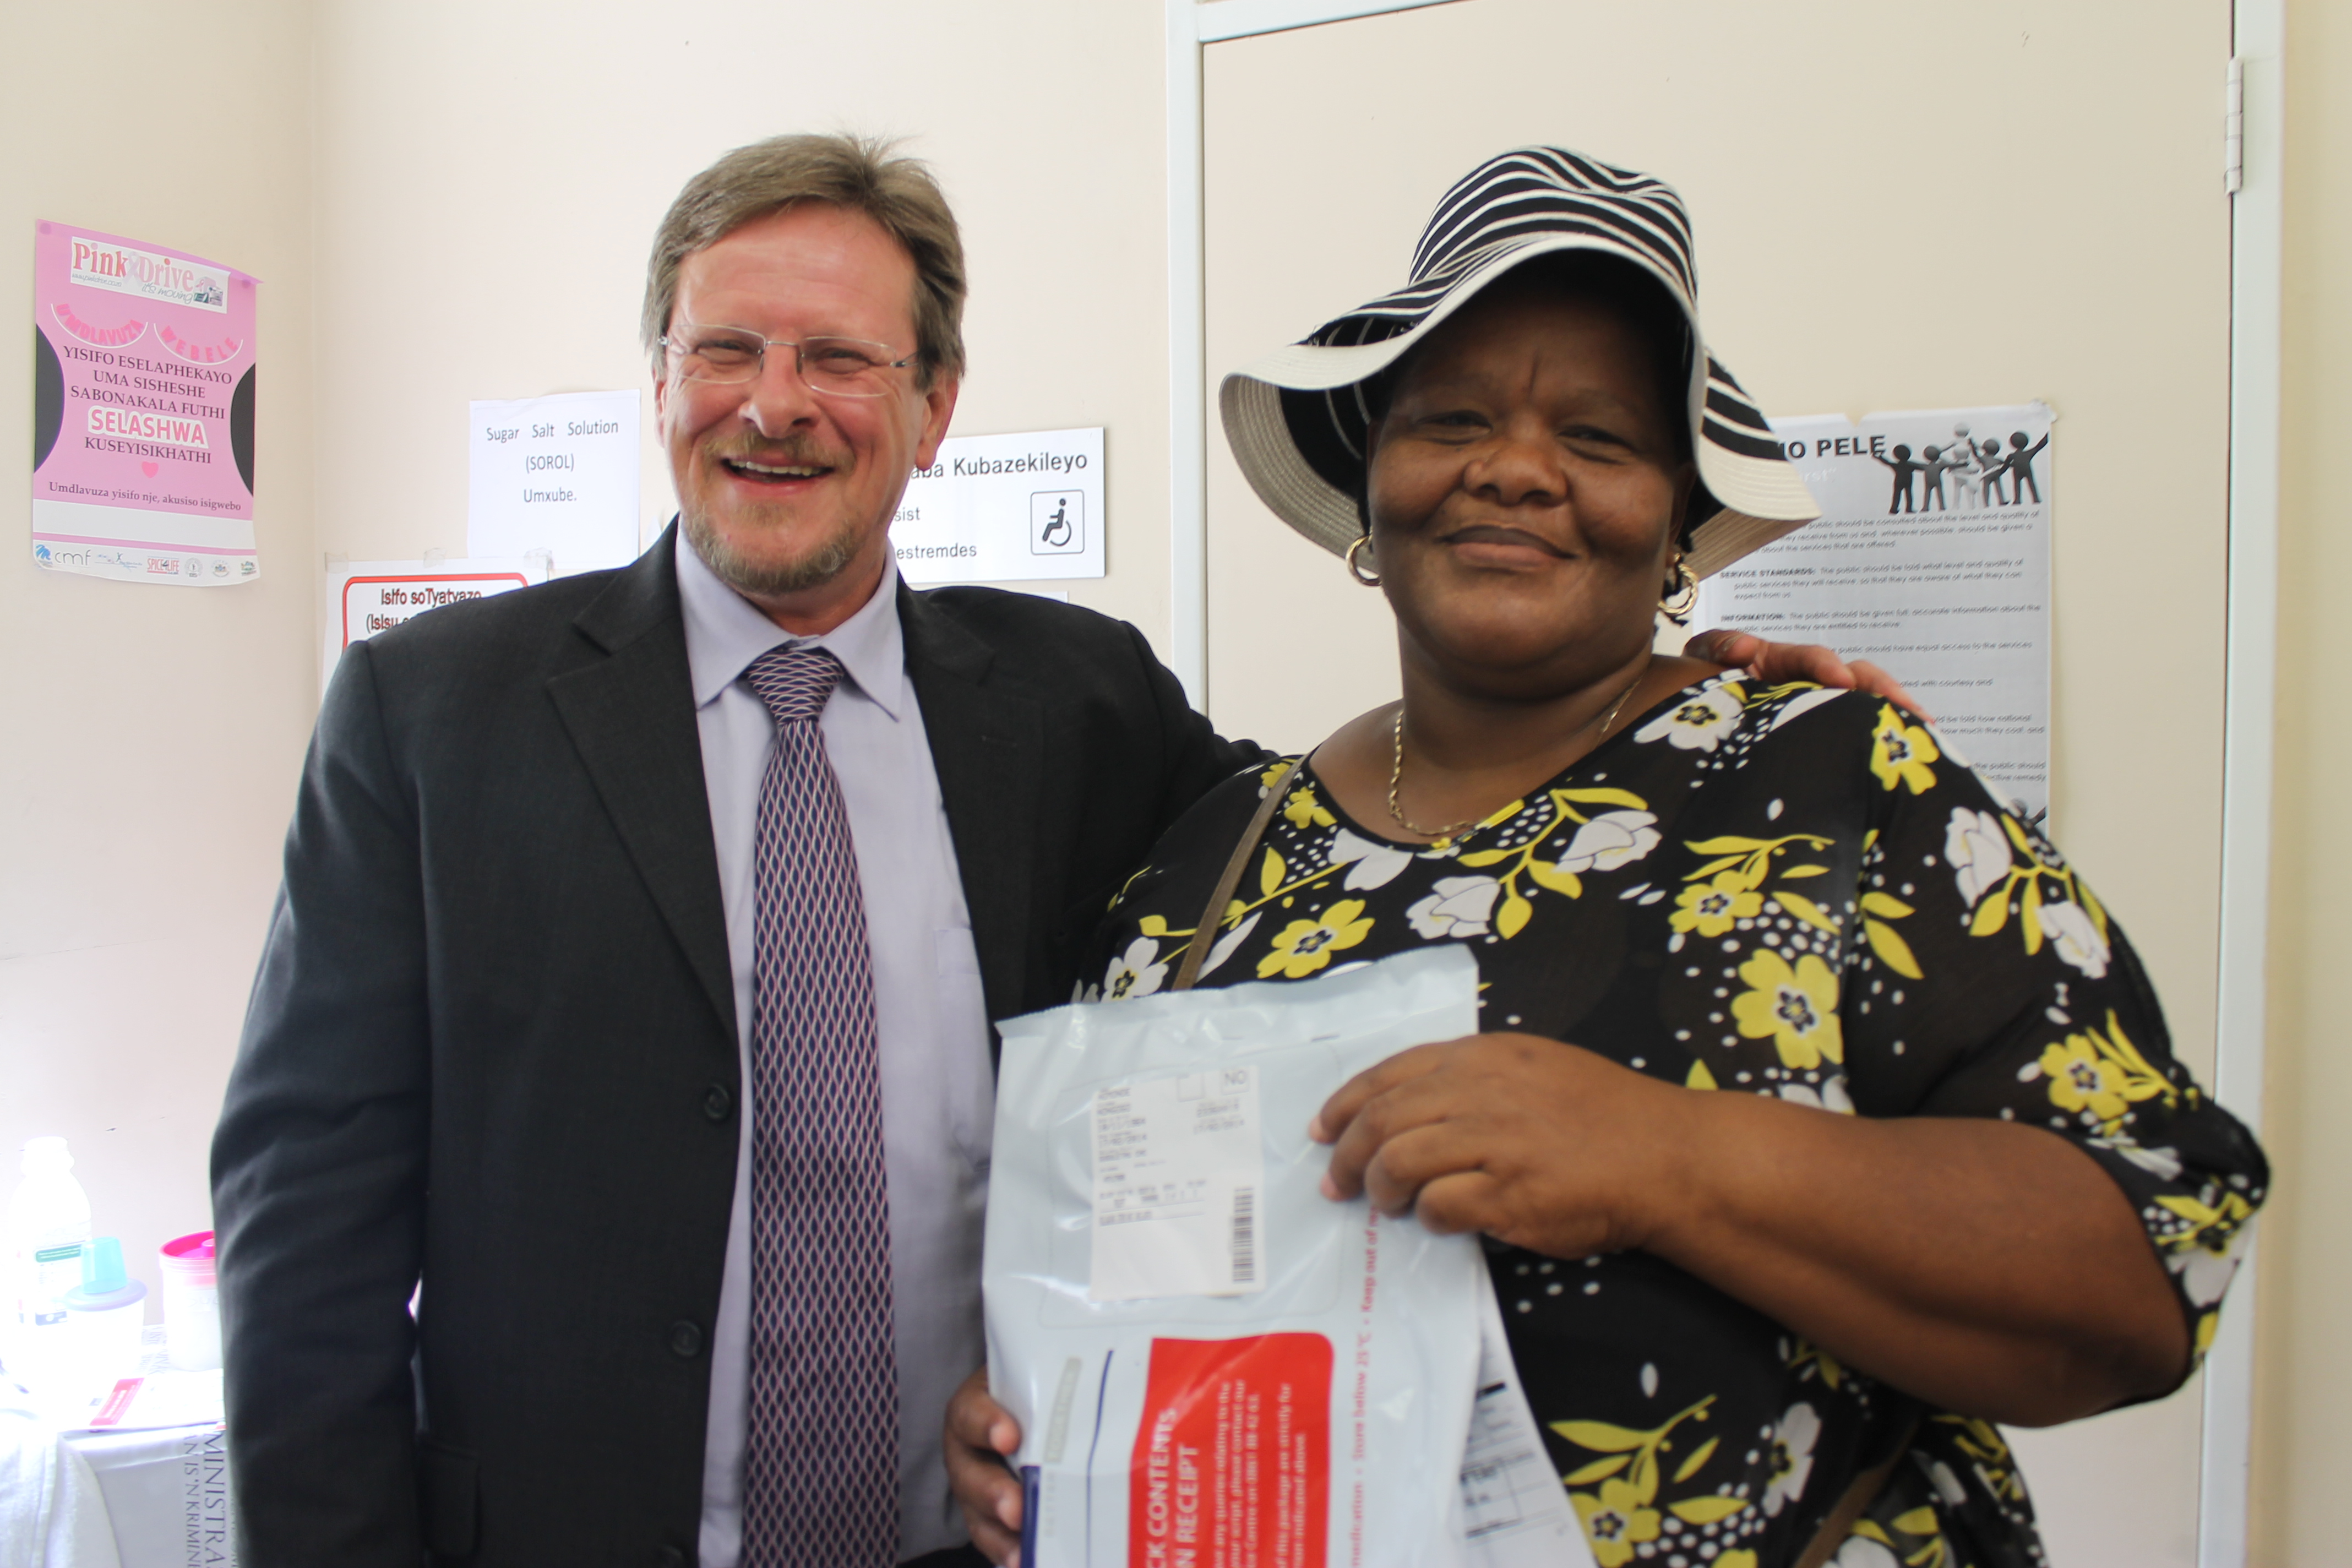 Nomonde Patience Nongogo (50) received the 5th million chronic medication parcel from the Western Cape Minister of Health, Mr Theuns Botha at the Gugulethu Community Health Centre.